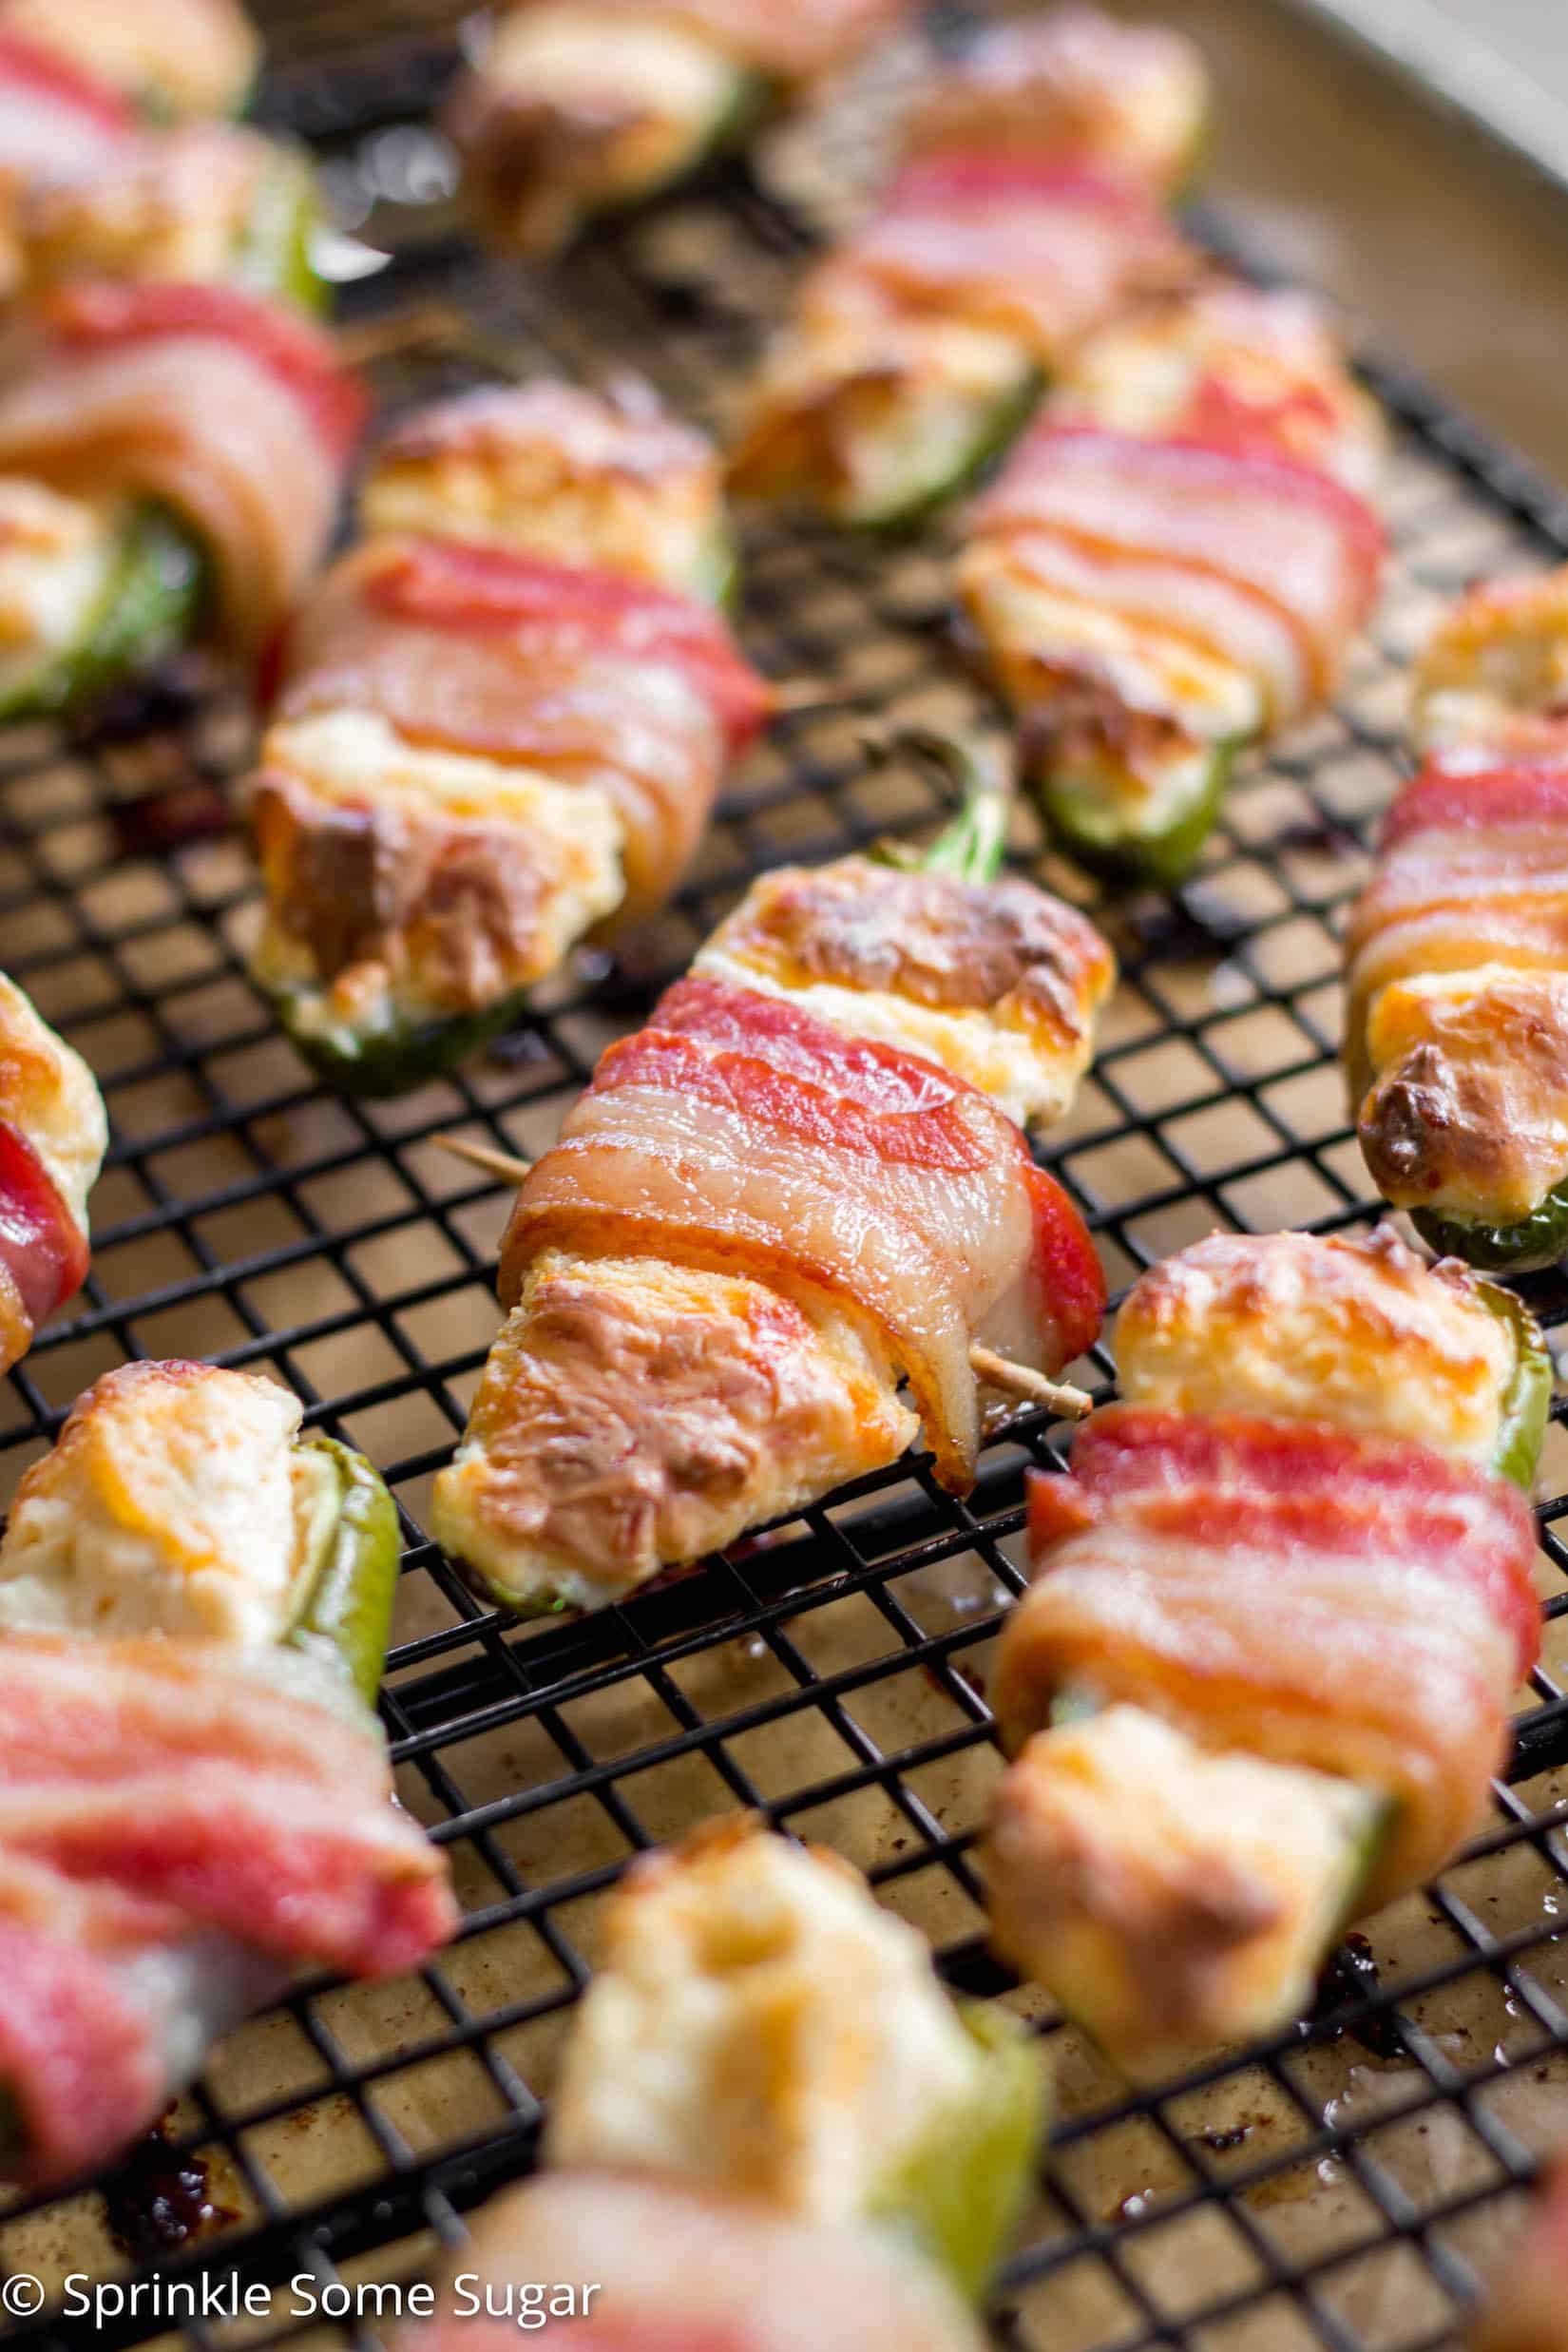 Bacon-Wrapped Jalapeño Poppers - Creamy, cheesy filled jalapeños are wrapped in a layer of juicy, crispy bacon. Talk about mouth-watering!